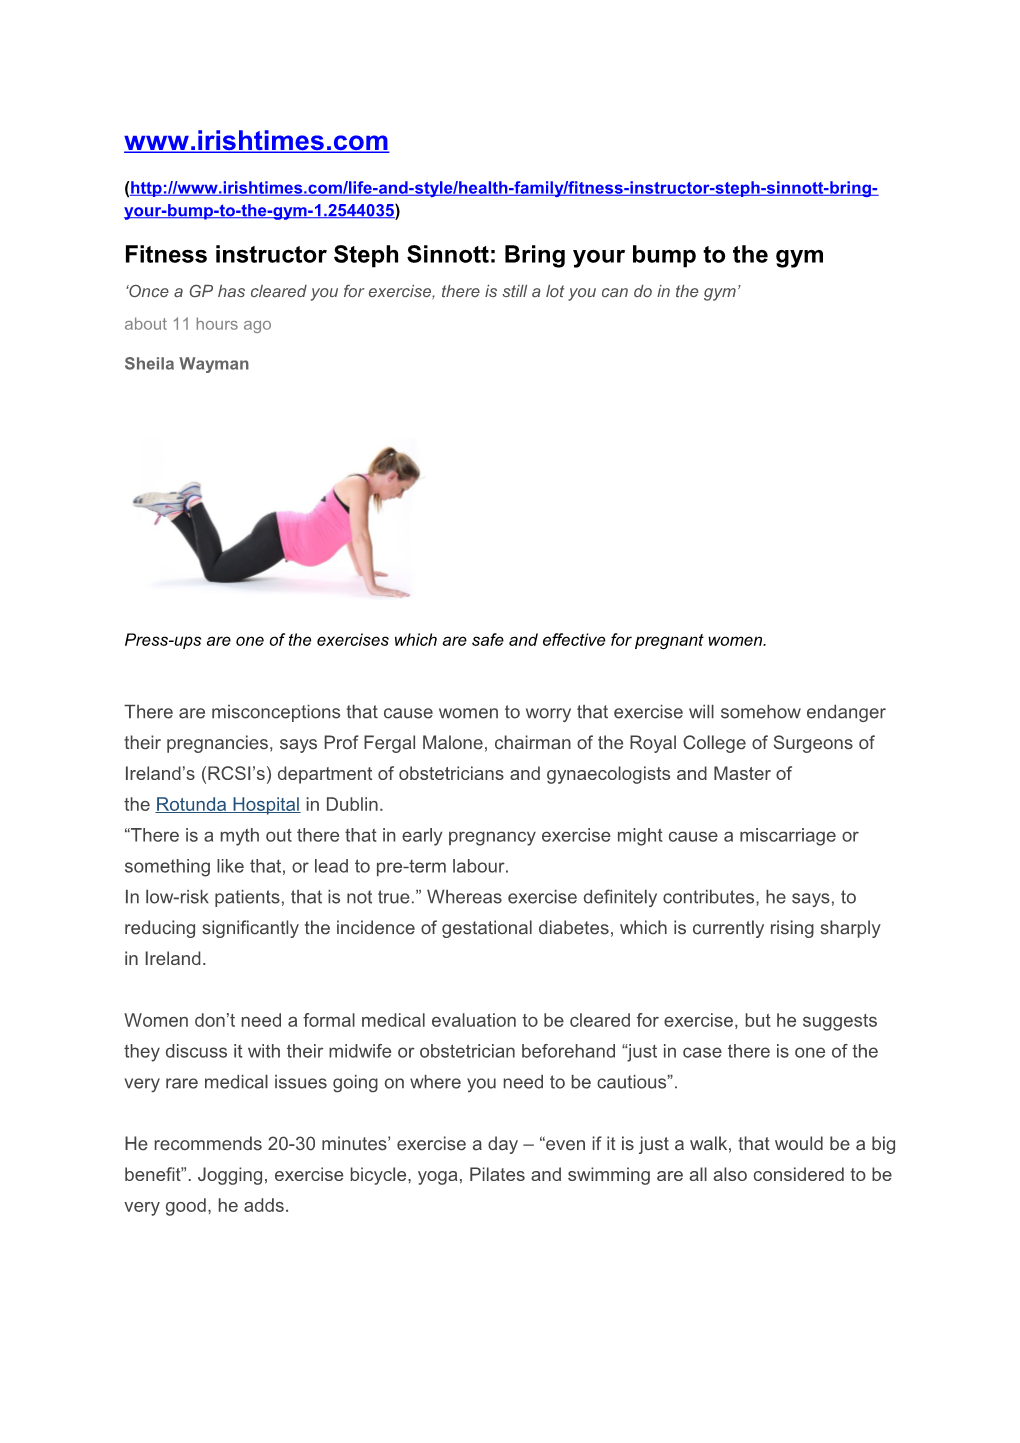 Fitness Instructor Steph Sinnott: Bring Your Bump to the Gym